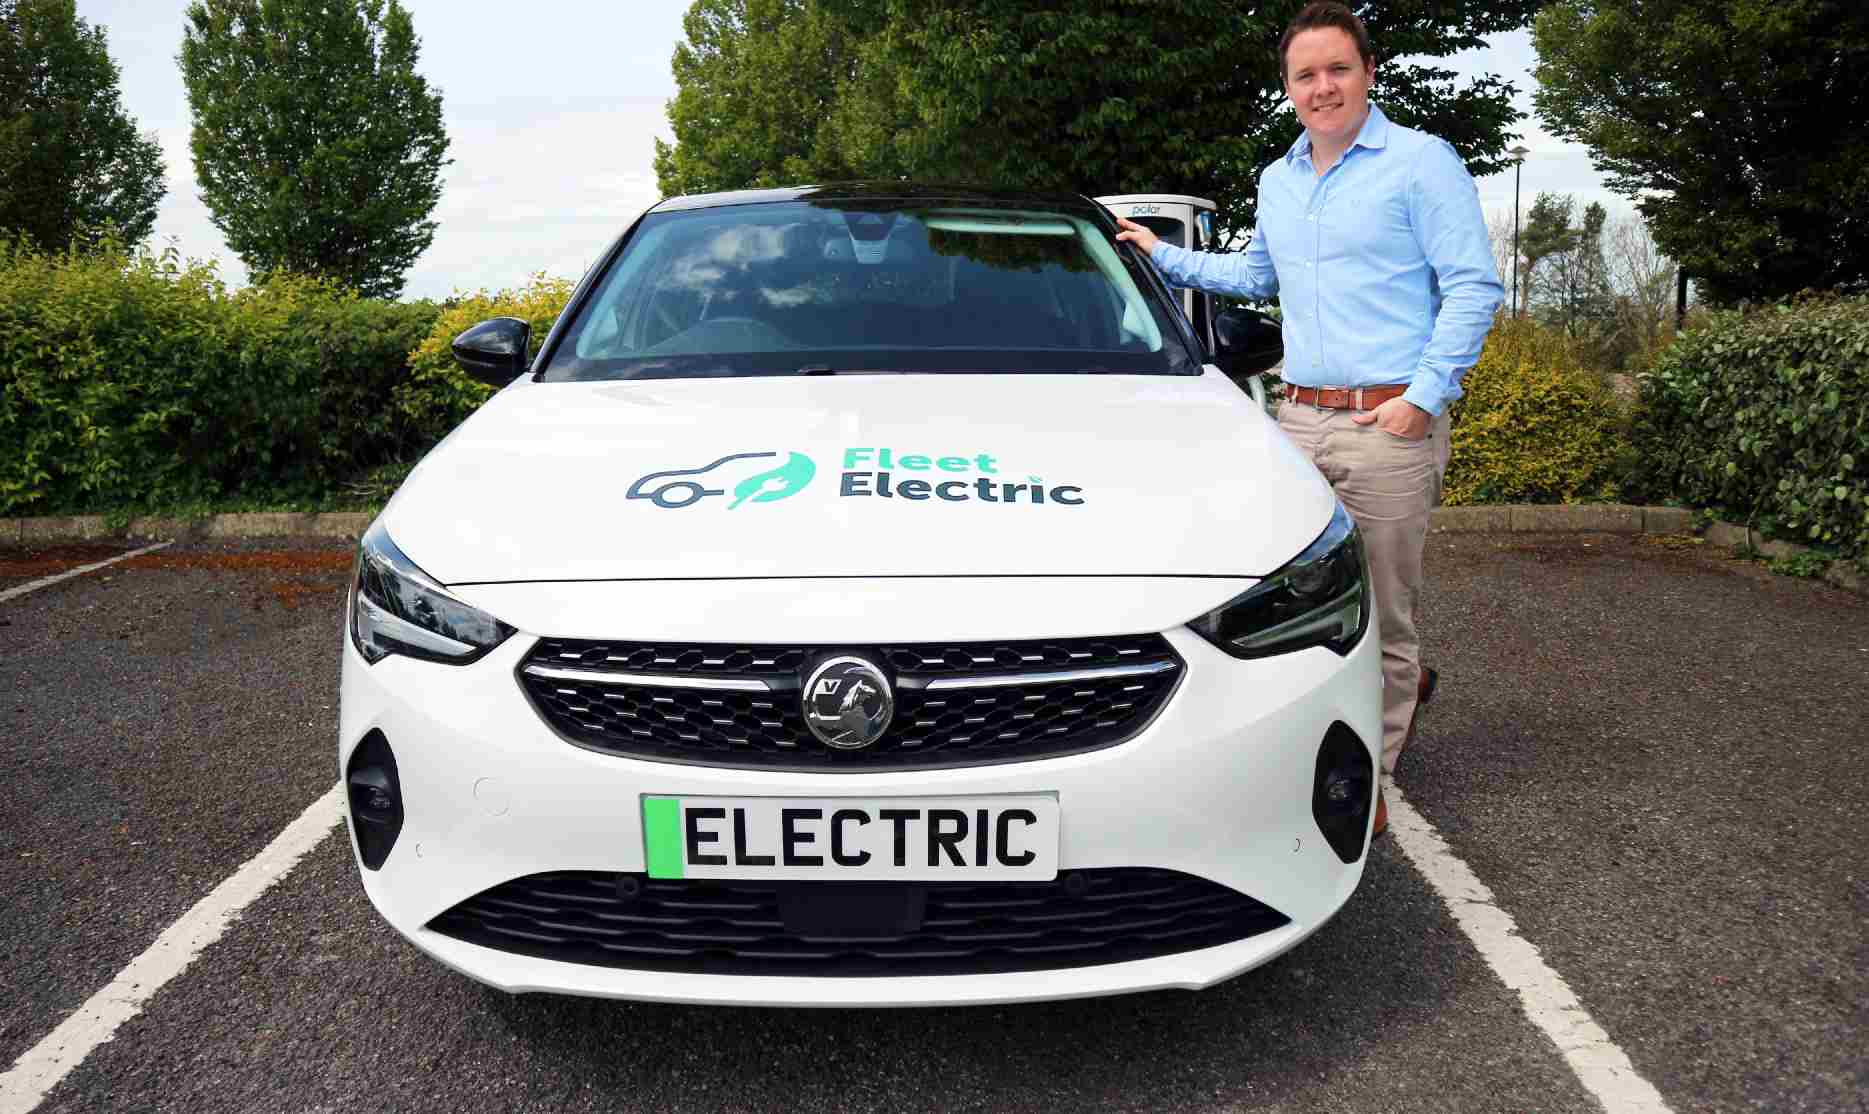 Fleet Electric launches with a climate positive leasing USP Broker News